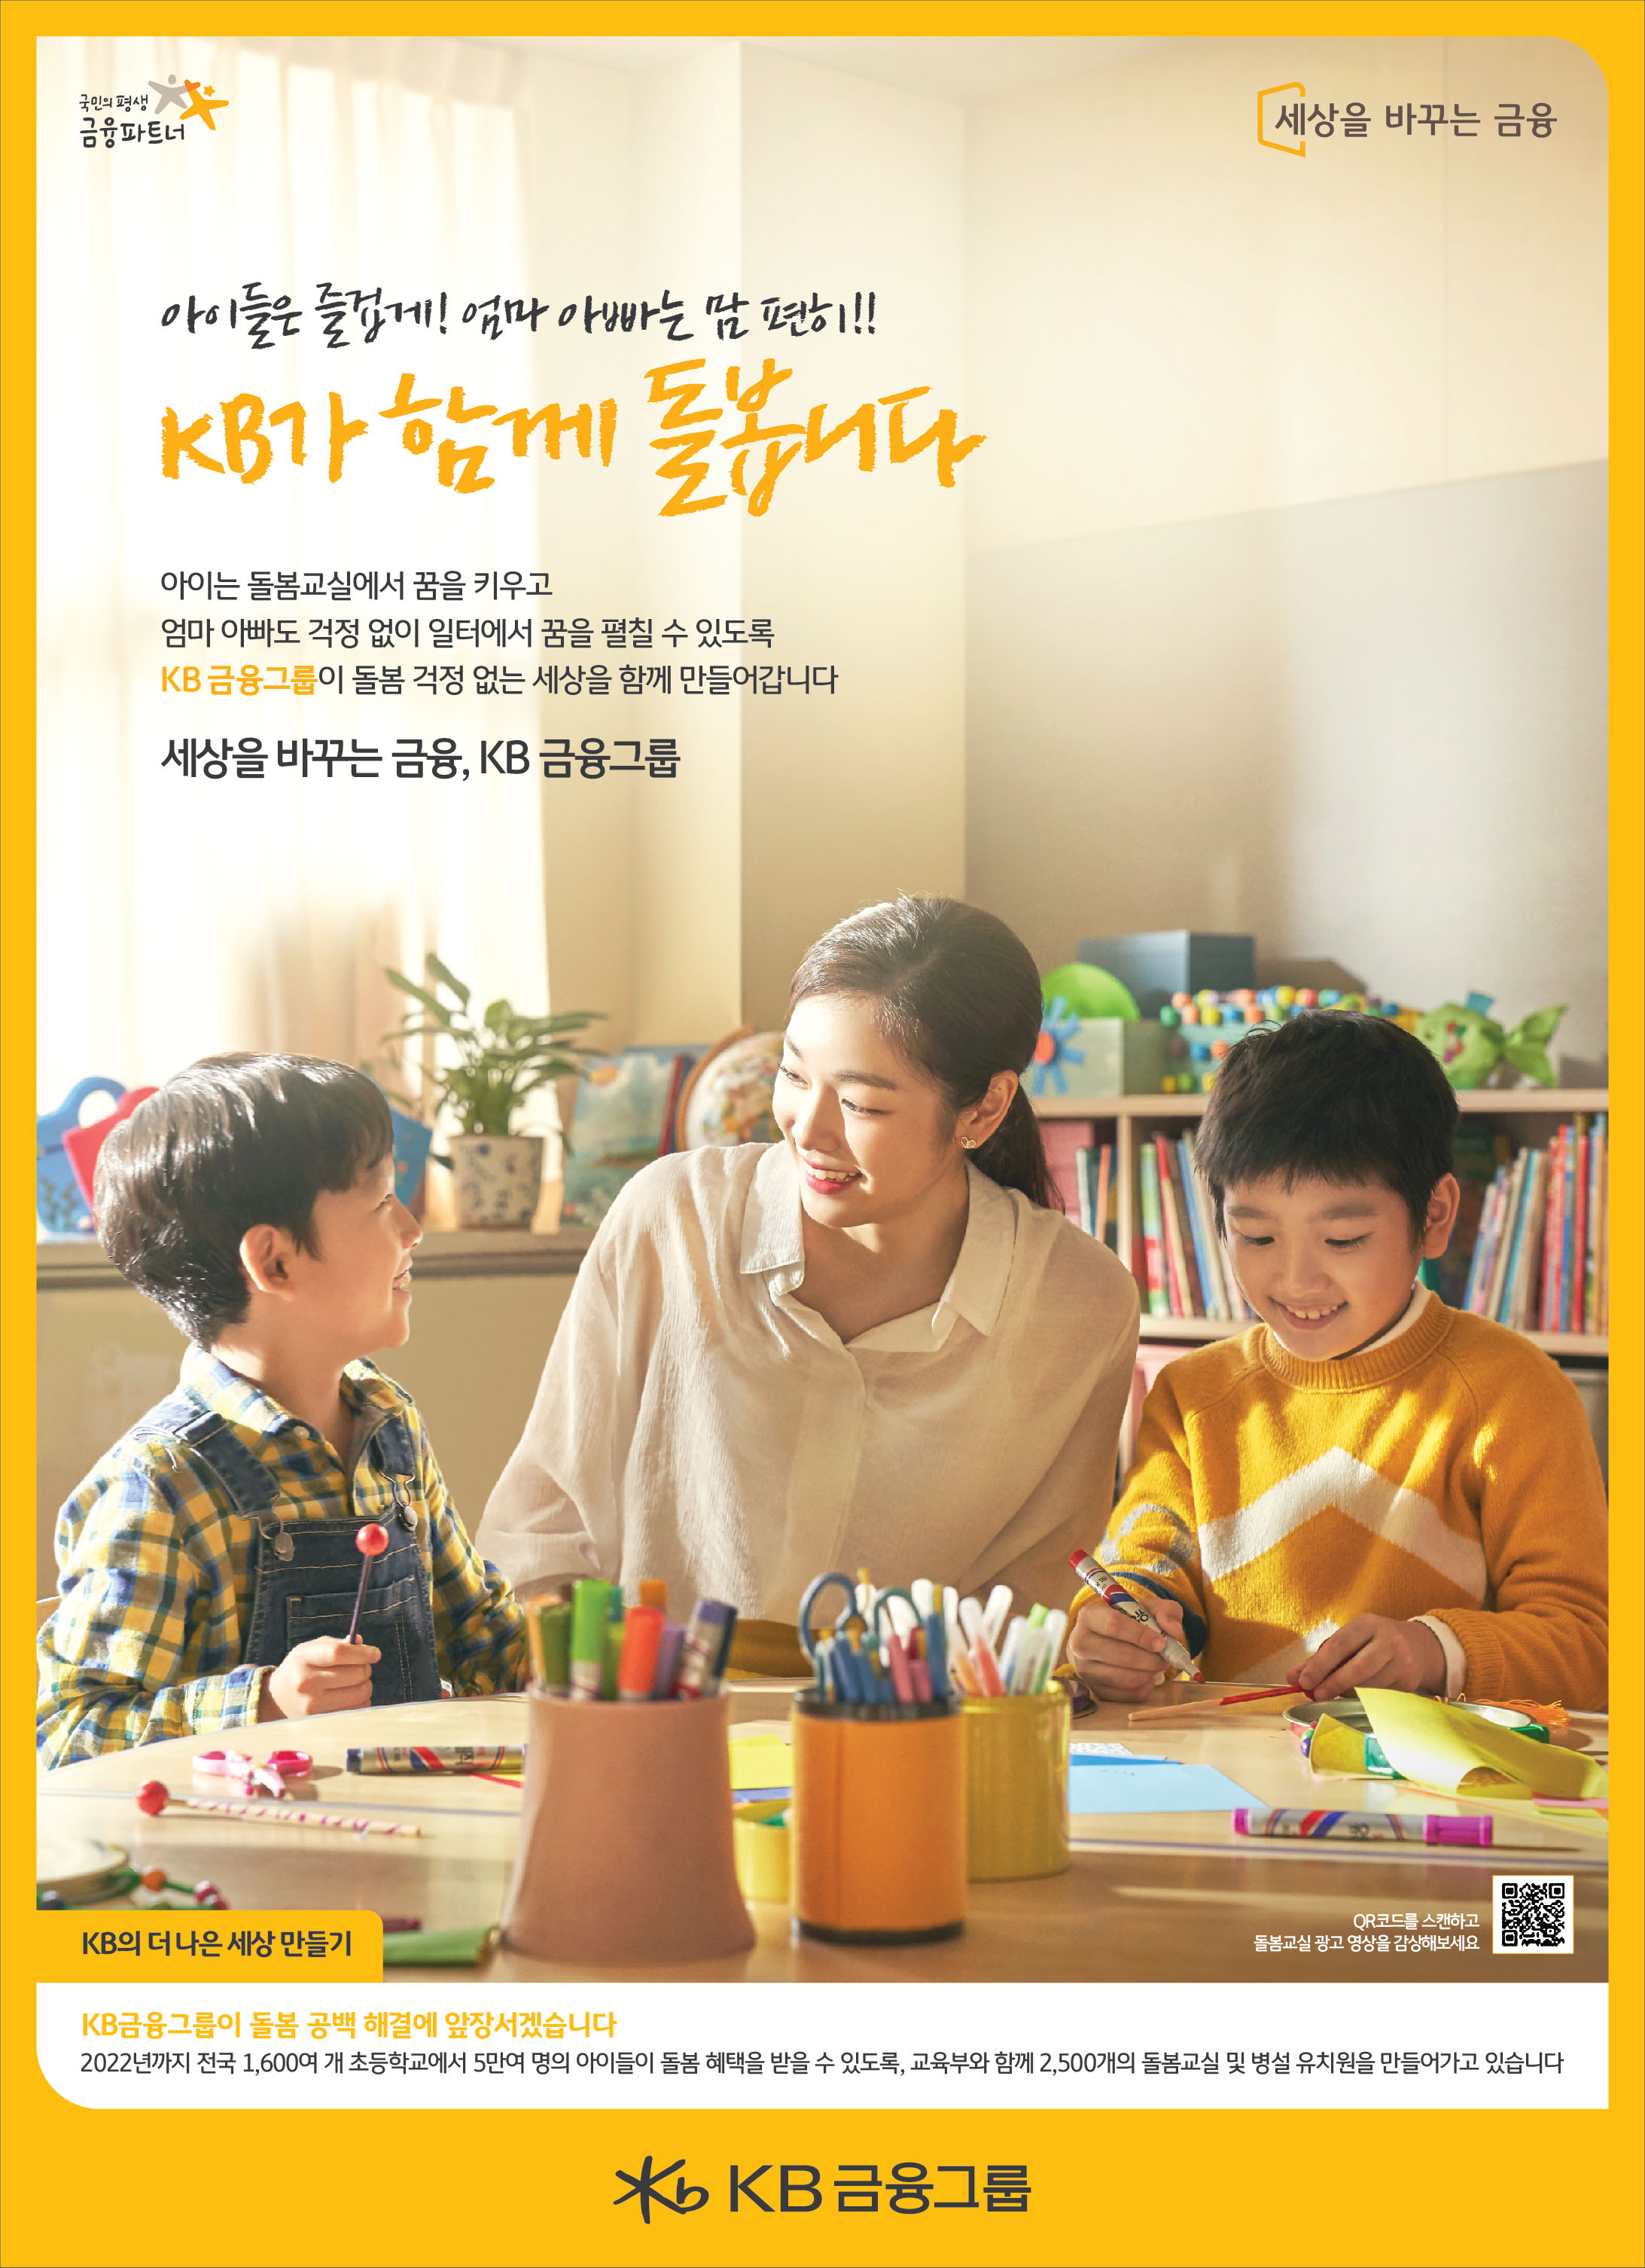 KB supports the better world by sponsoring Afterschool Childcare